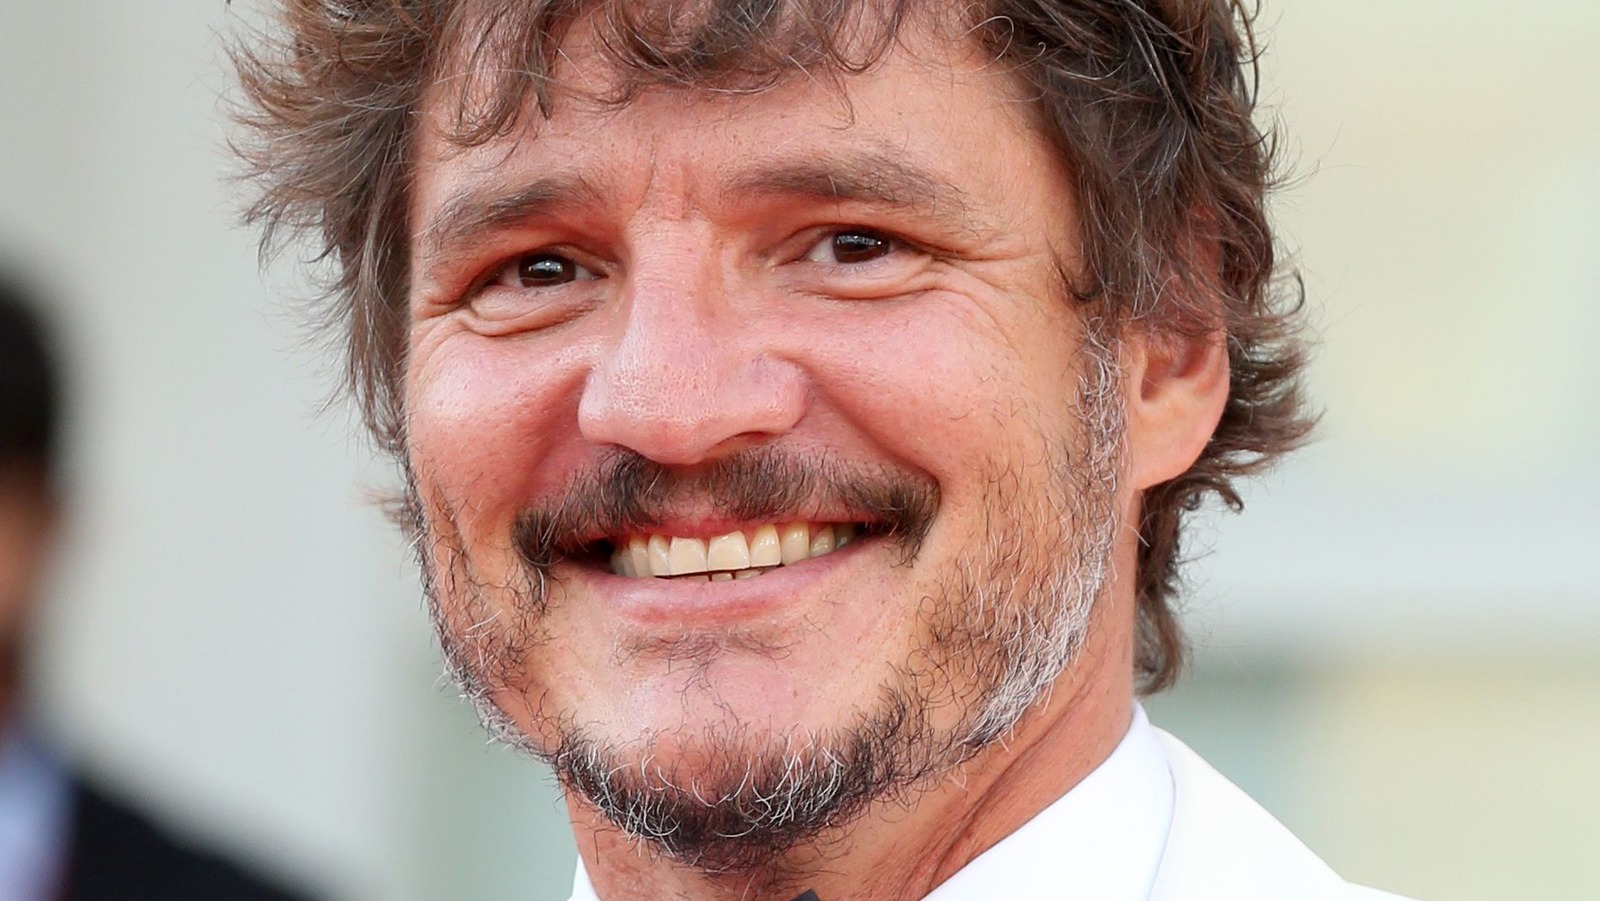 How Pedro Pascal Was Cast In The Last of Us, The Last of Us